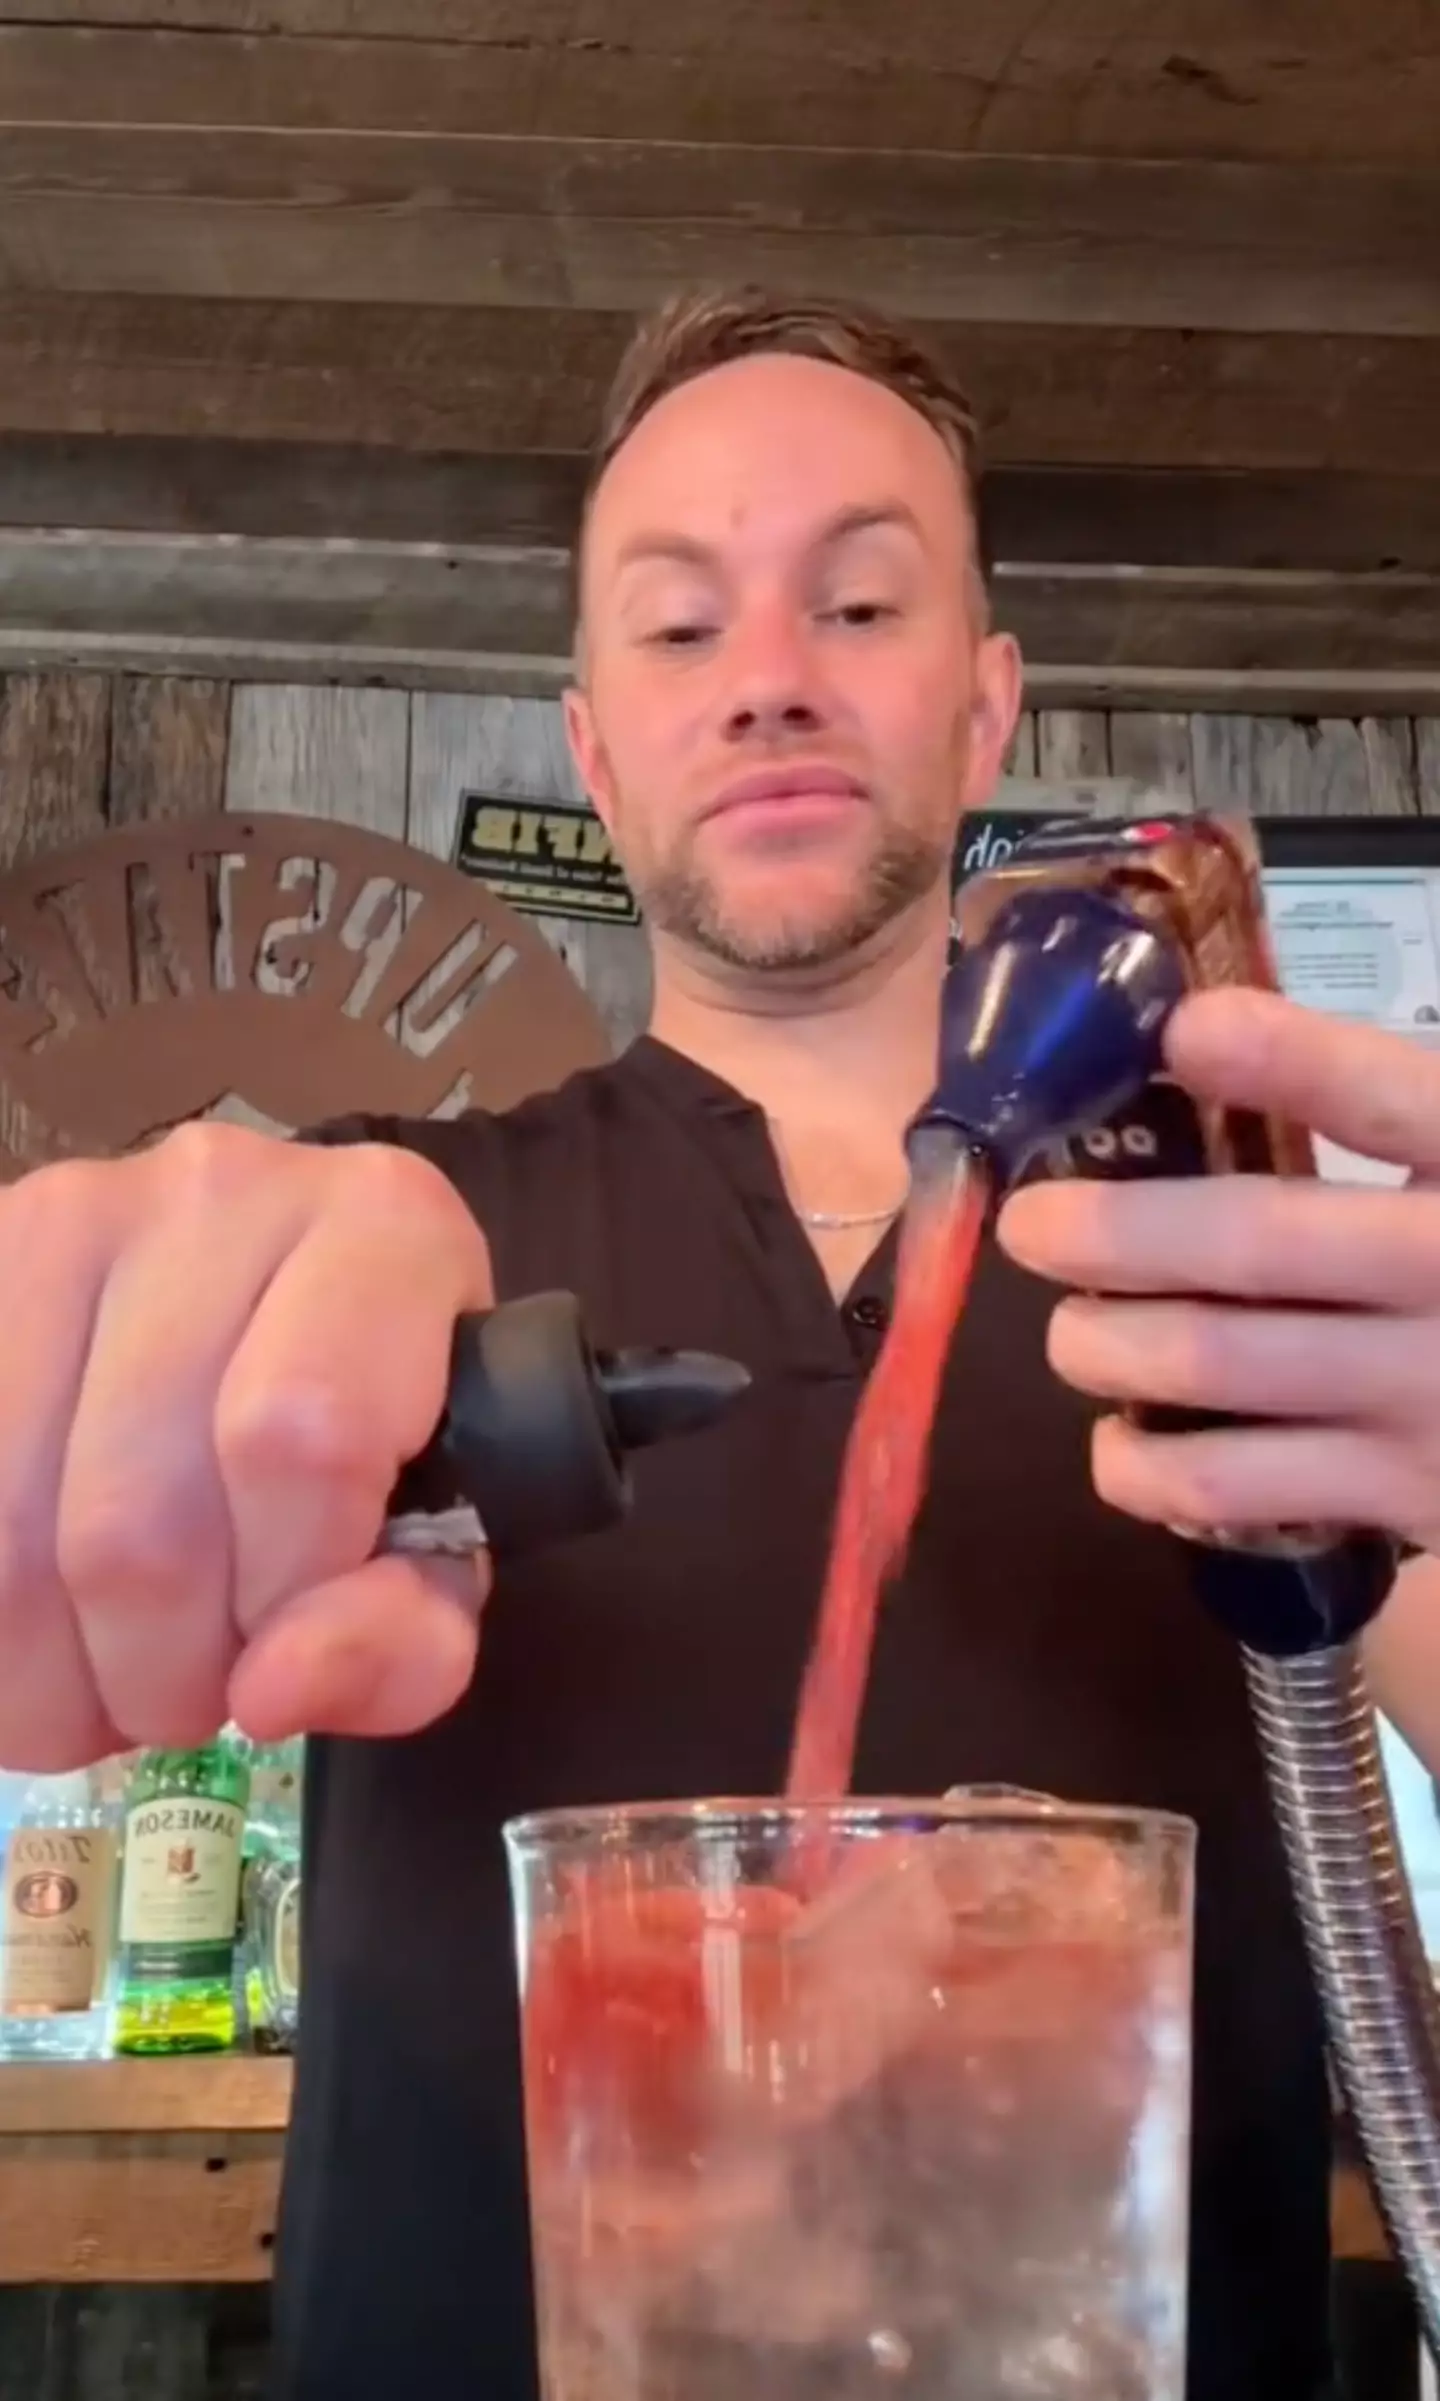 Bartender, Ben Smith, shared his viral hack on how to deal with drunk customers.